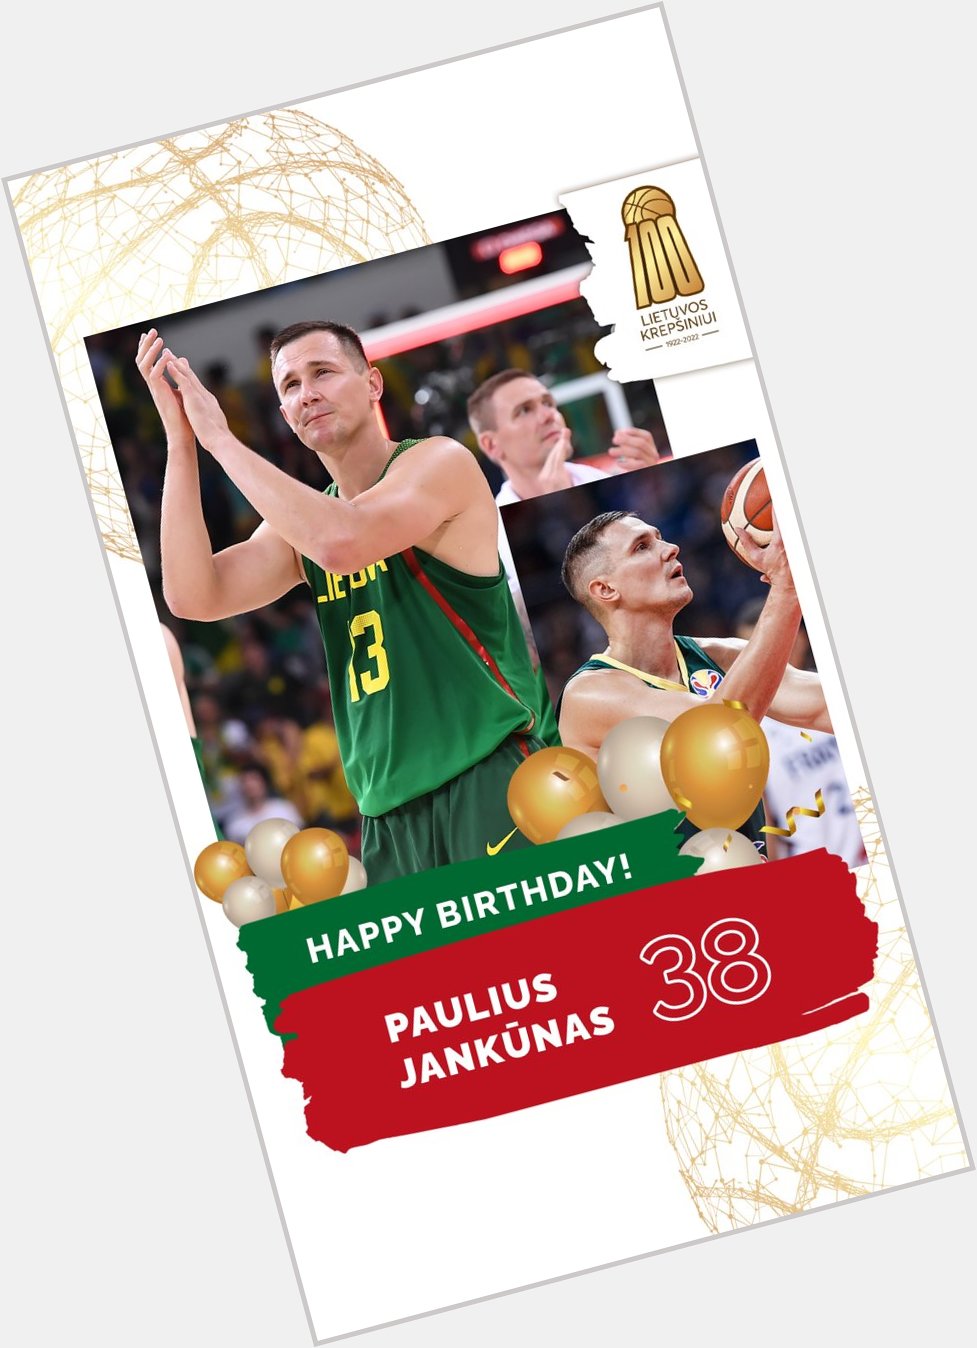 Happy birthday to the Lithuanian version of Tim Duncan - Paulius Jank nas!  